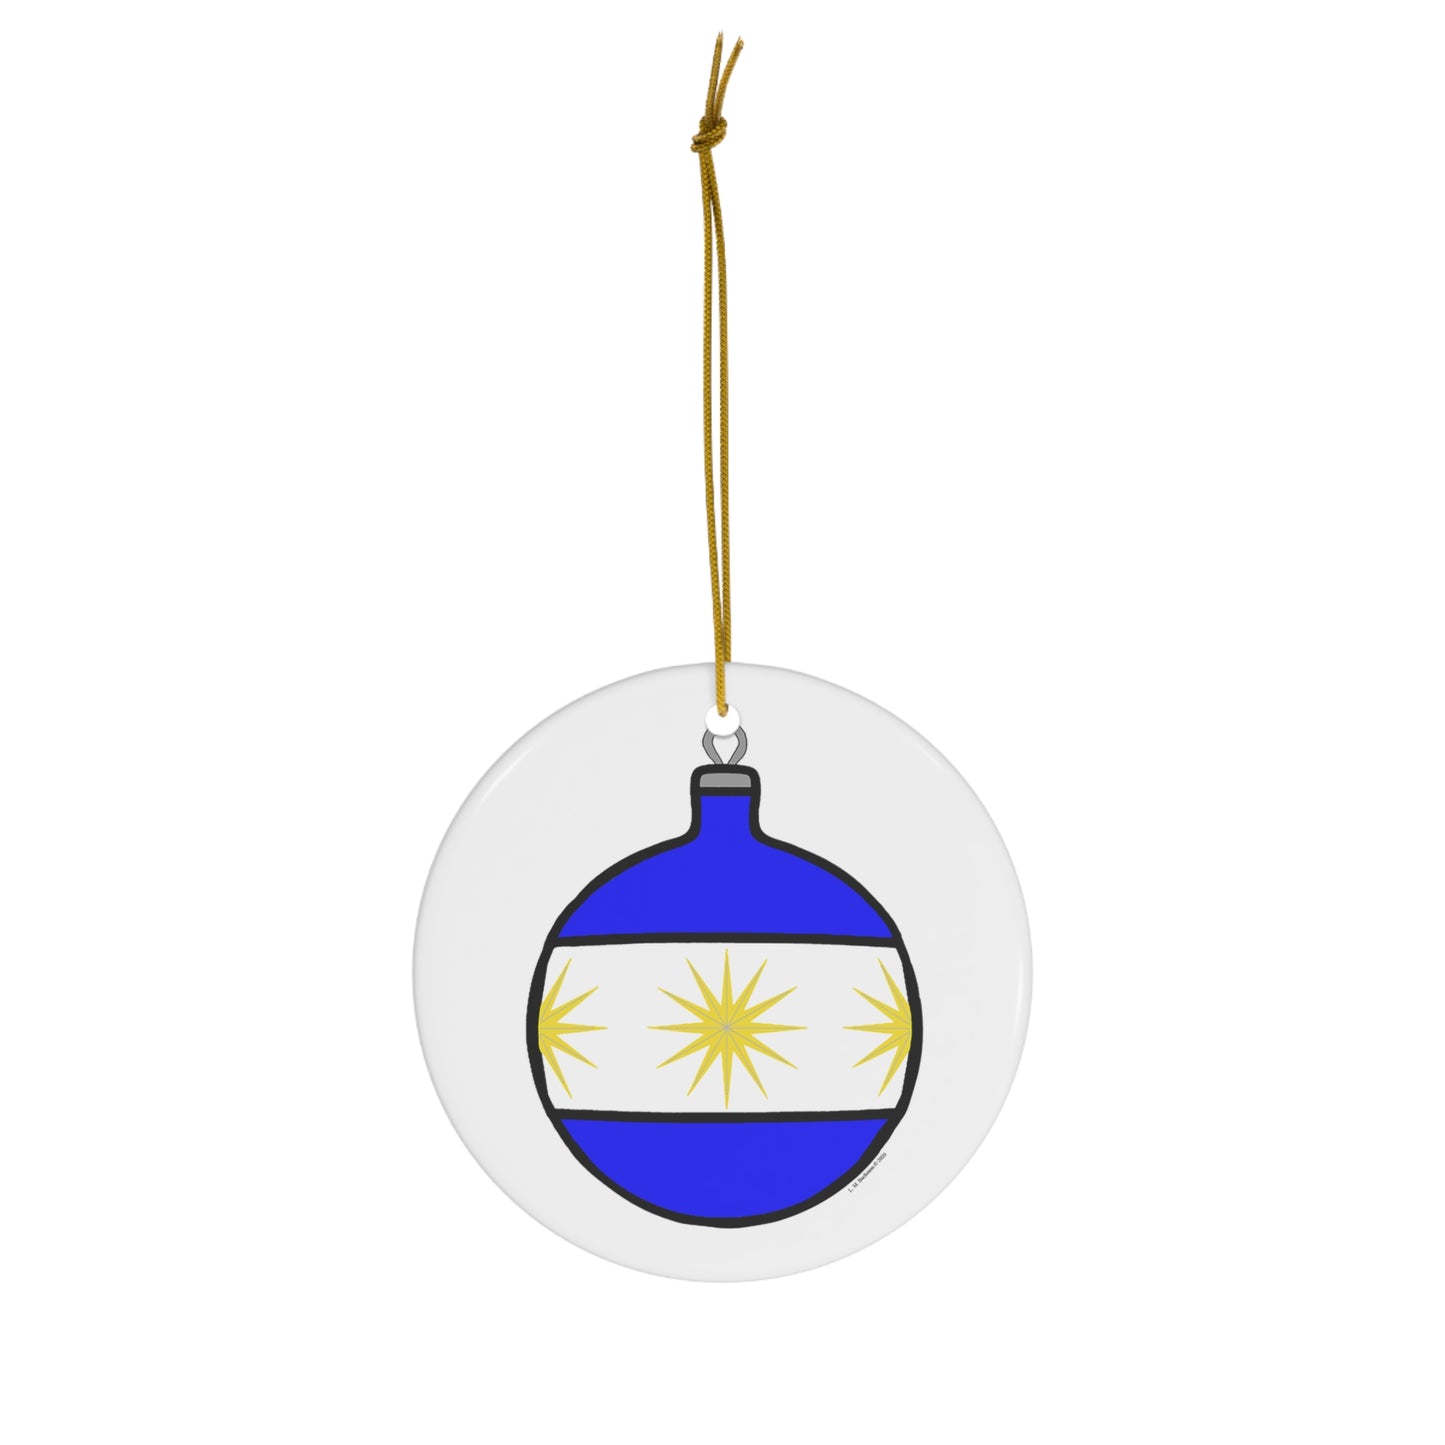 Blue Ball with Gold Stars Round Ceramic Ornament